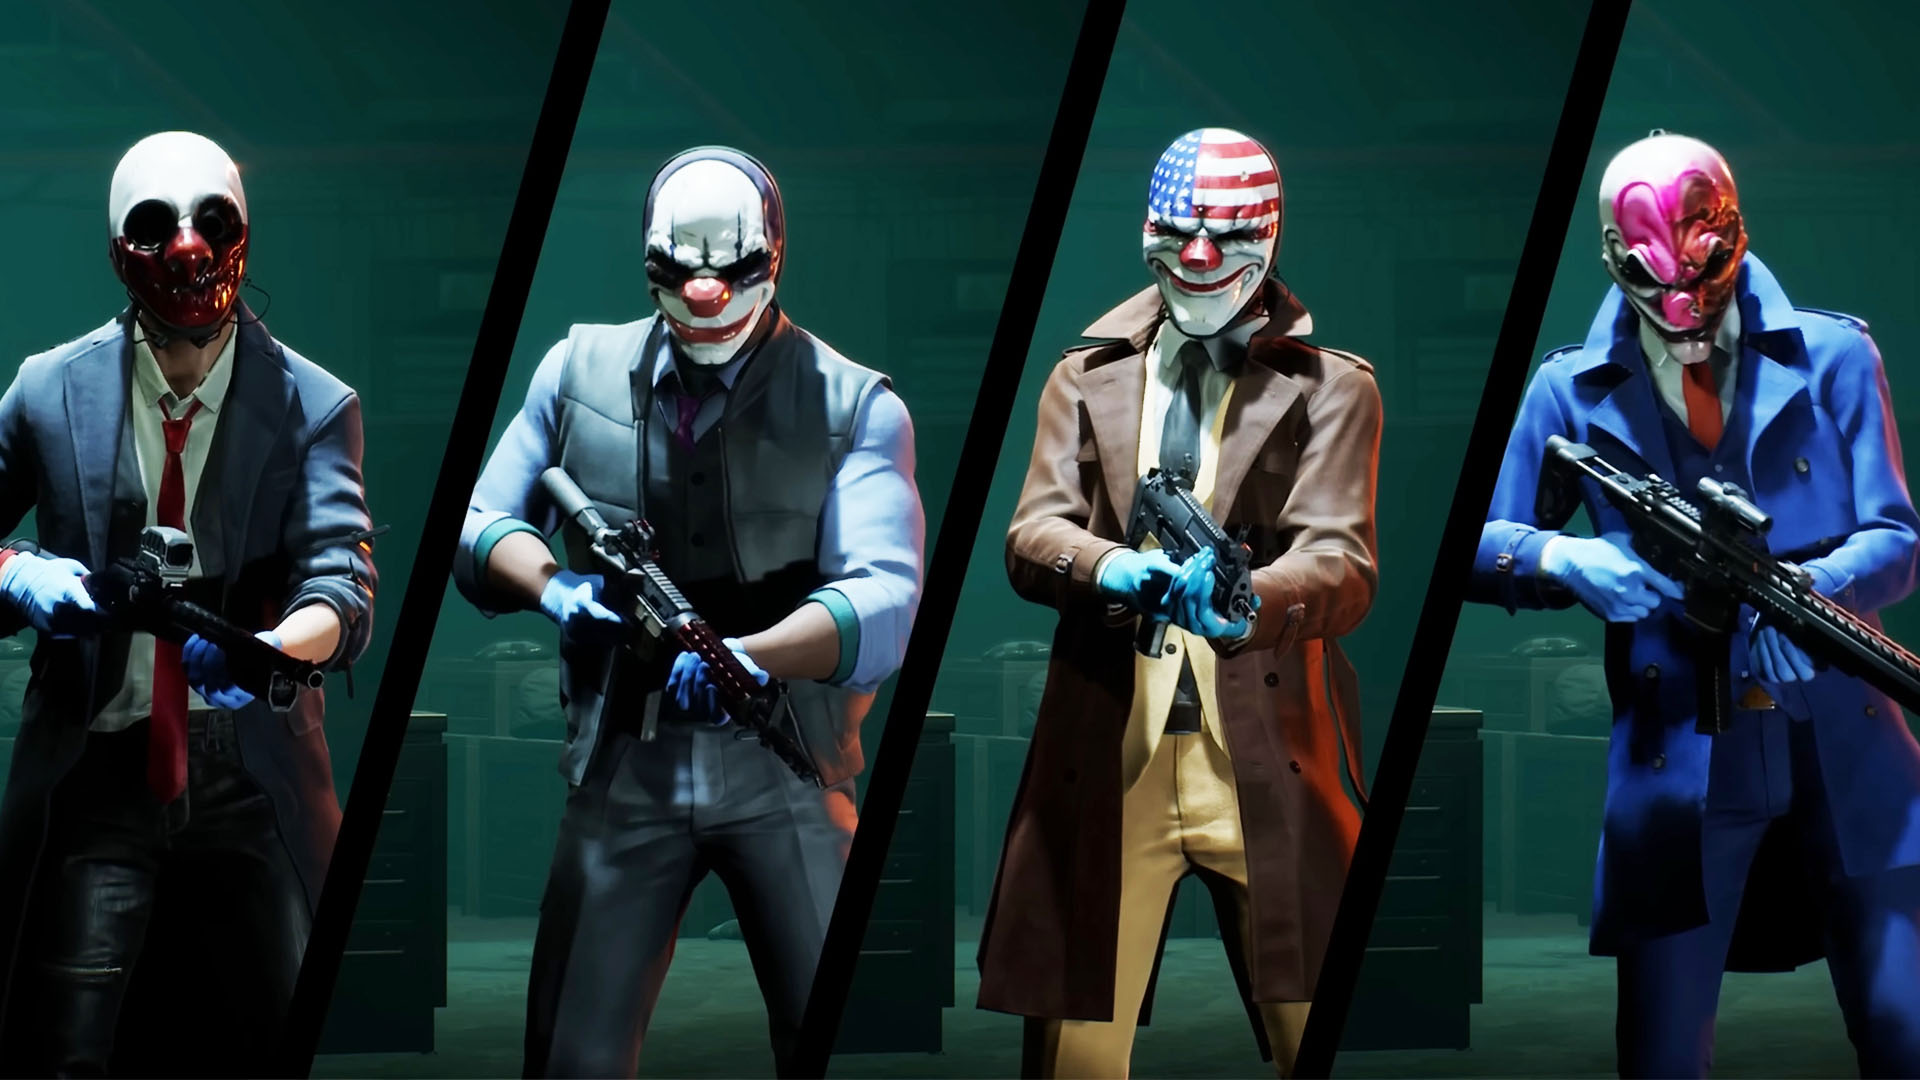 Payday 3 release date, trailers, gameplay, story, and more